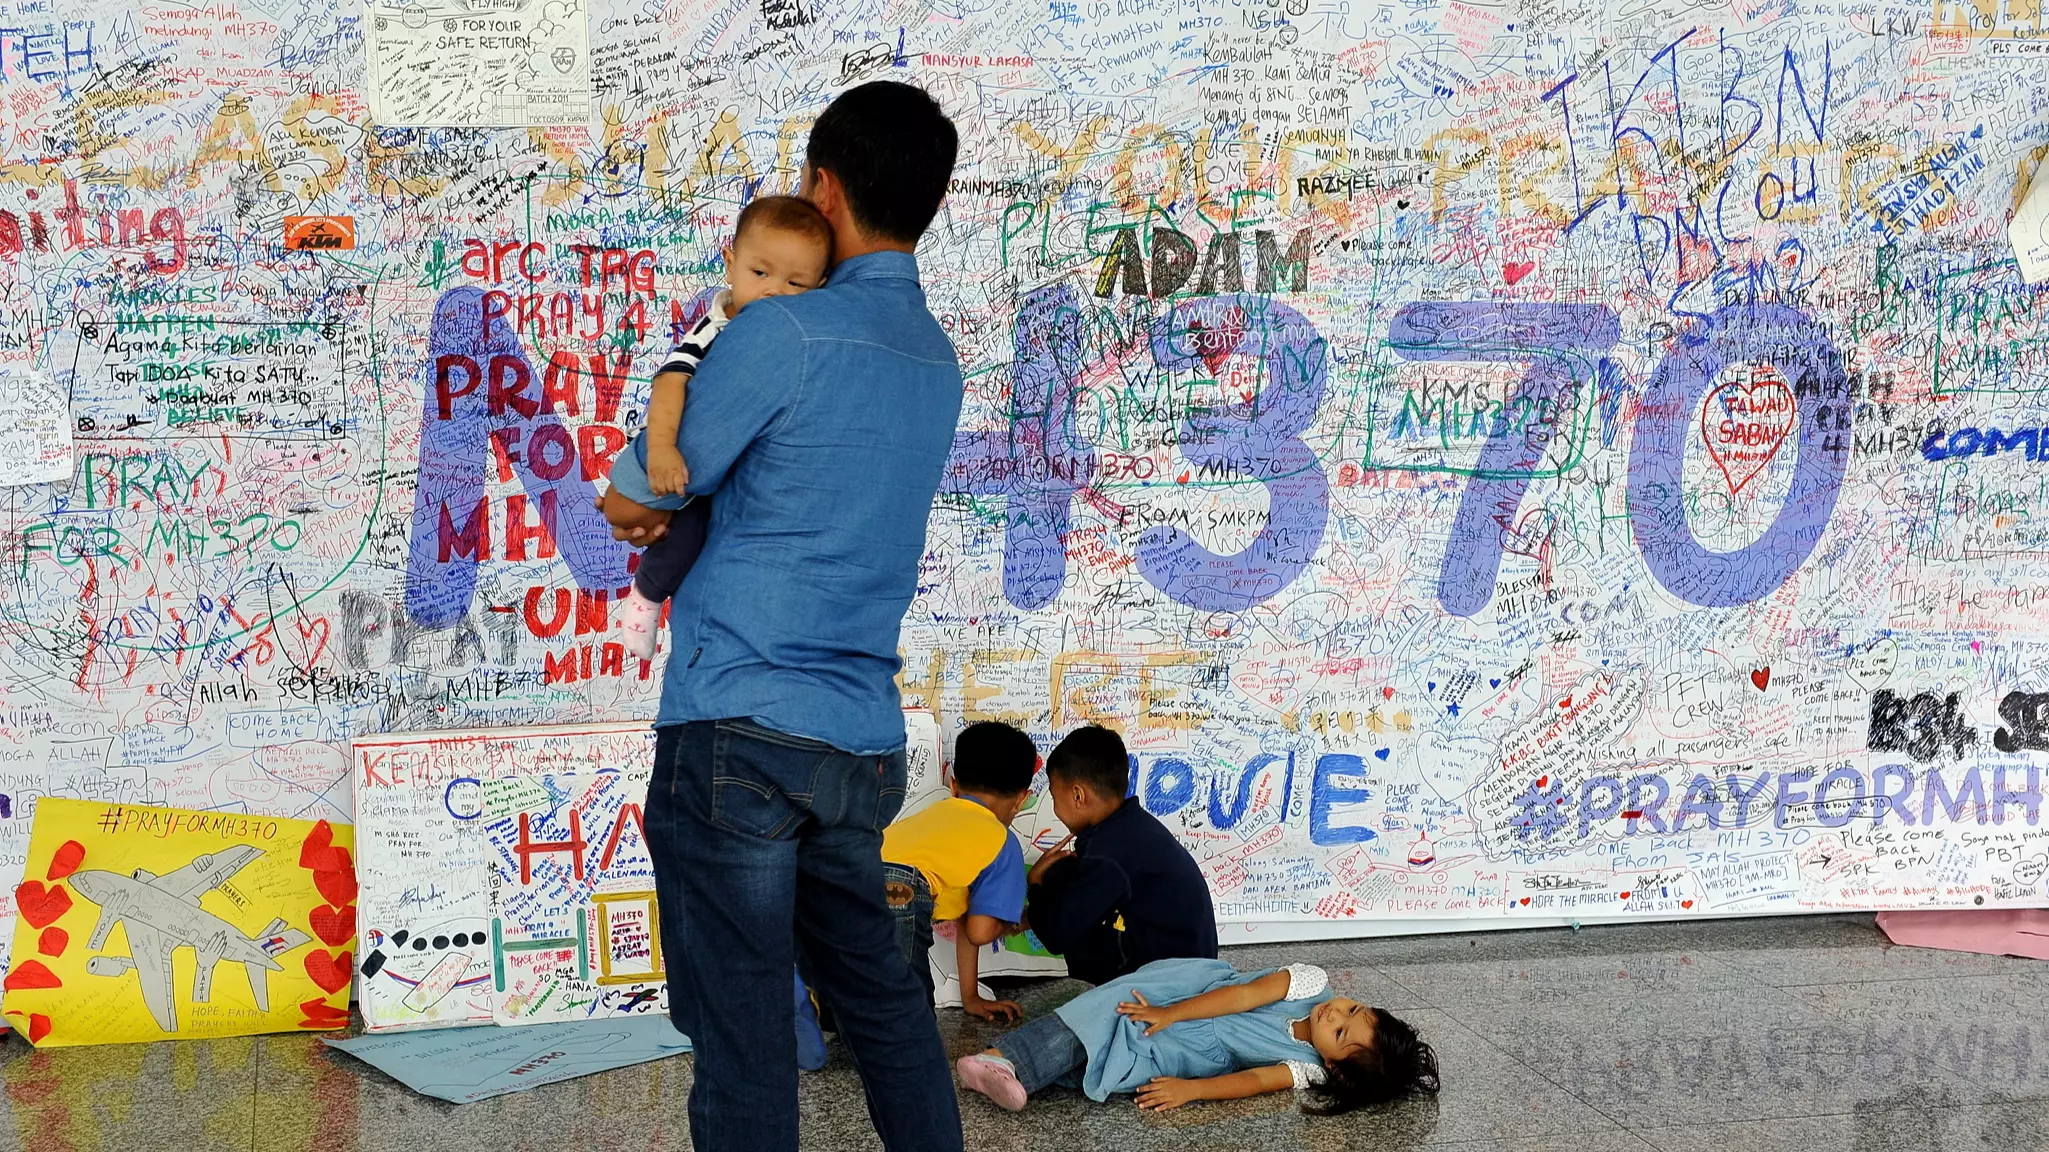 Former Pilot Offers His Controversial Theory On What Happened To MH370